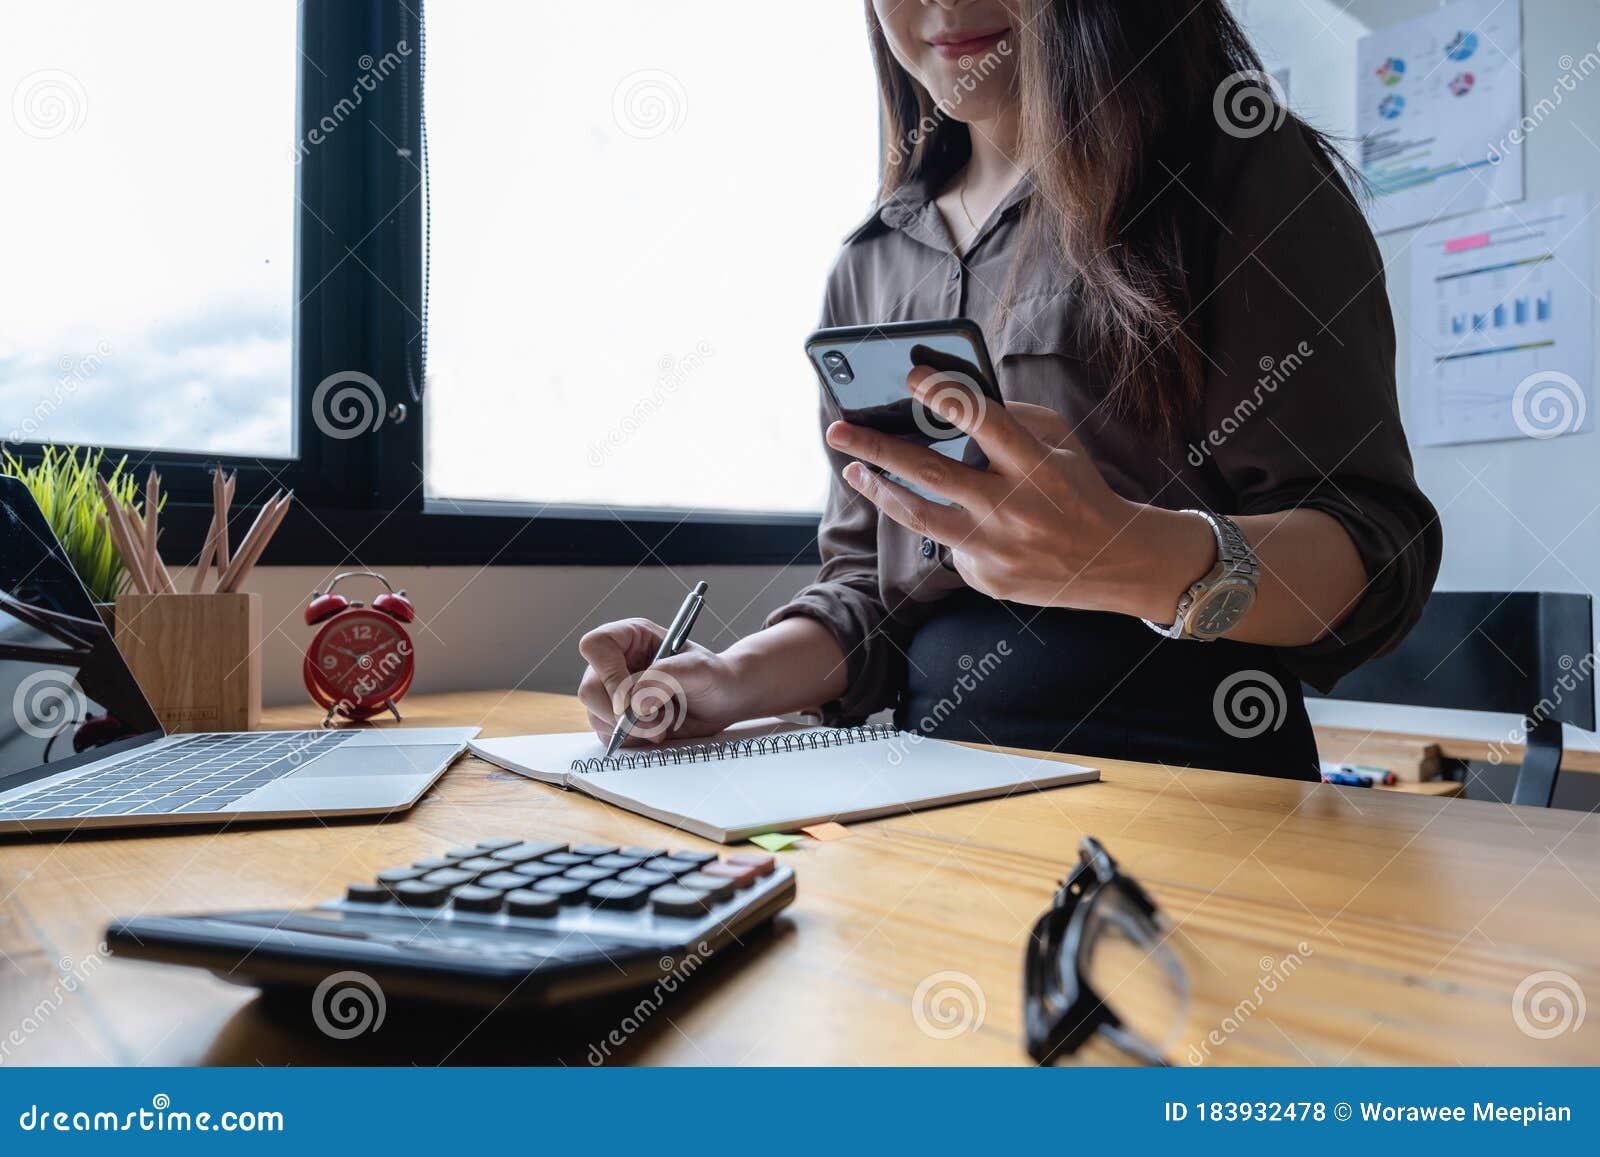 portrait of business woman and smiling using video call on smartphone with her parents. quarantine and work from home concept